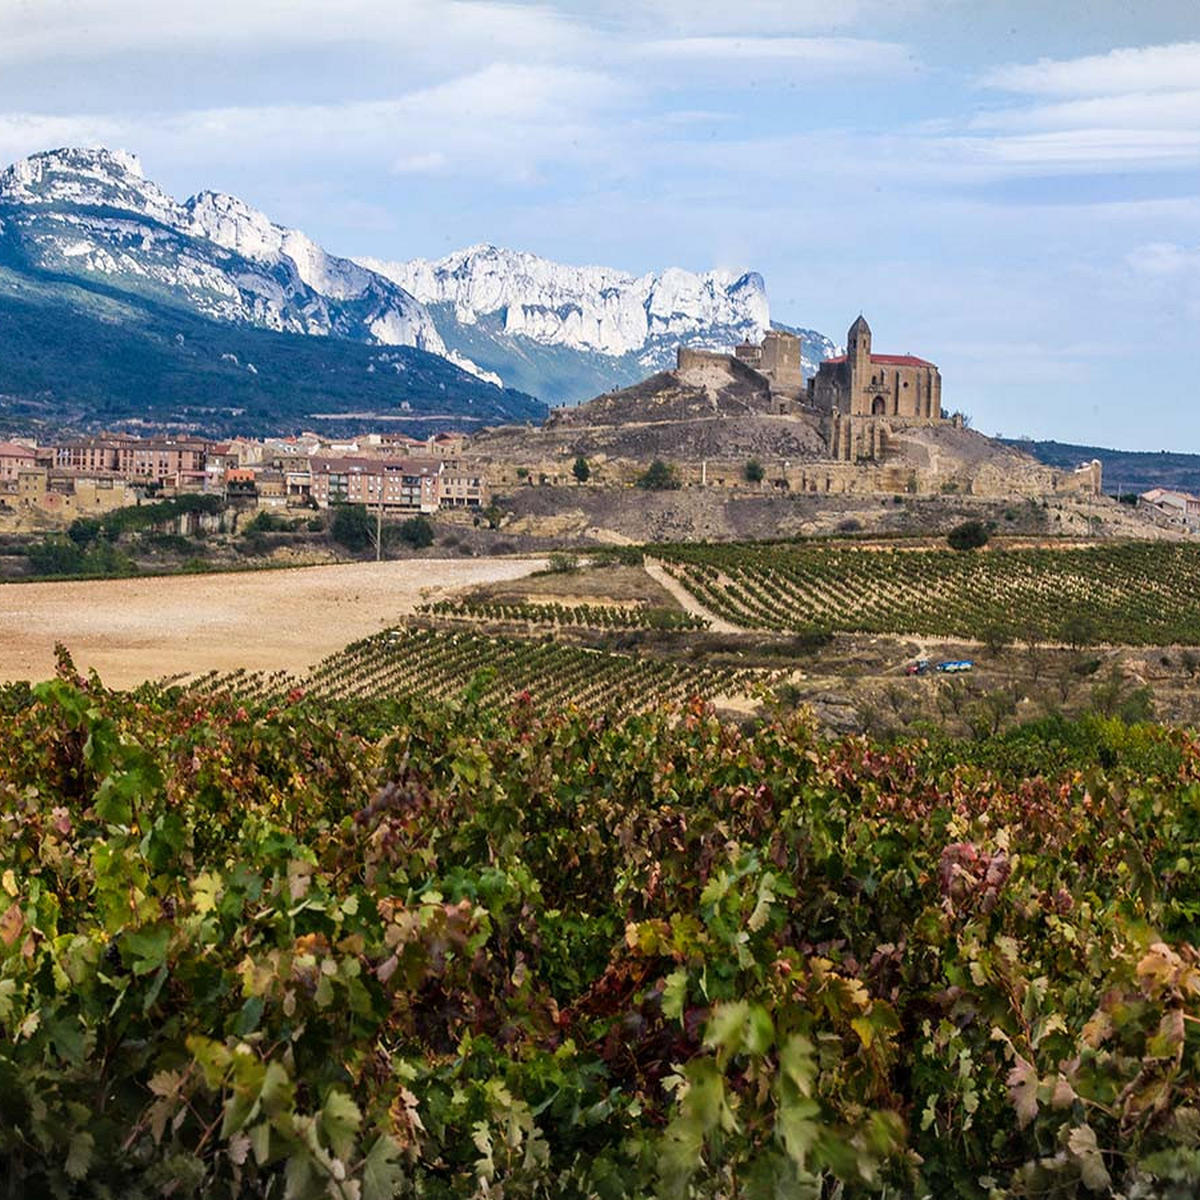 A photo of the vineyards of Vega Sicilia, with a village on a hilltop in the background, set amid snow-capped mountain peaks. 